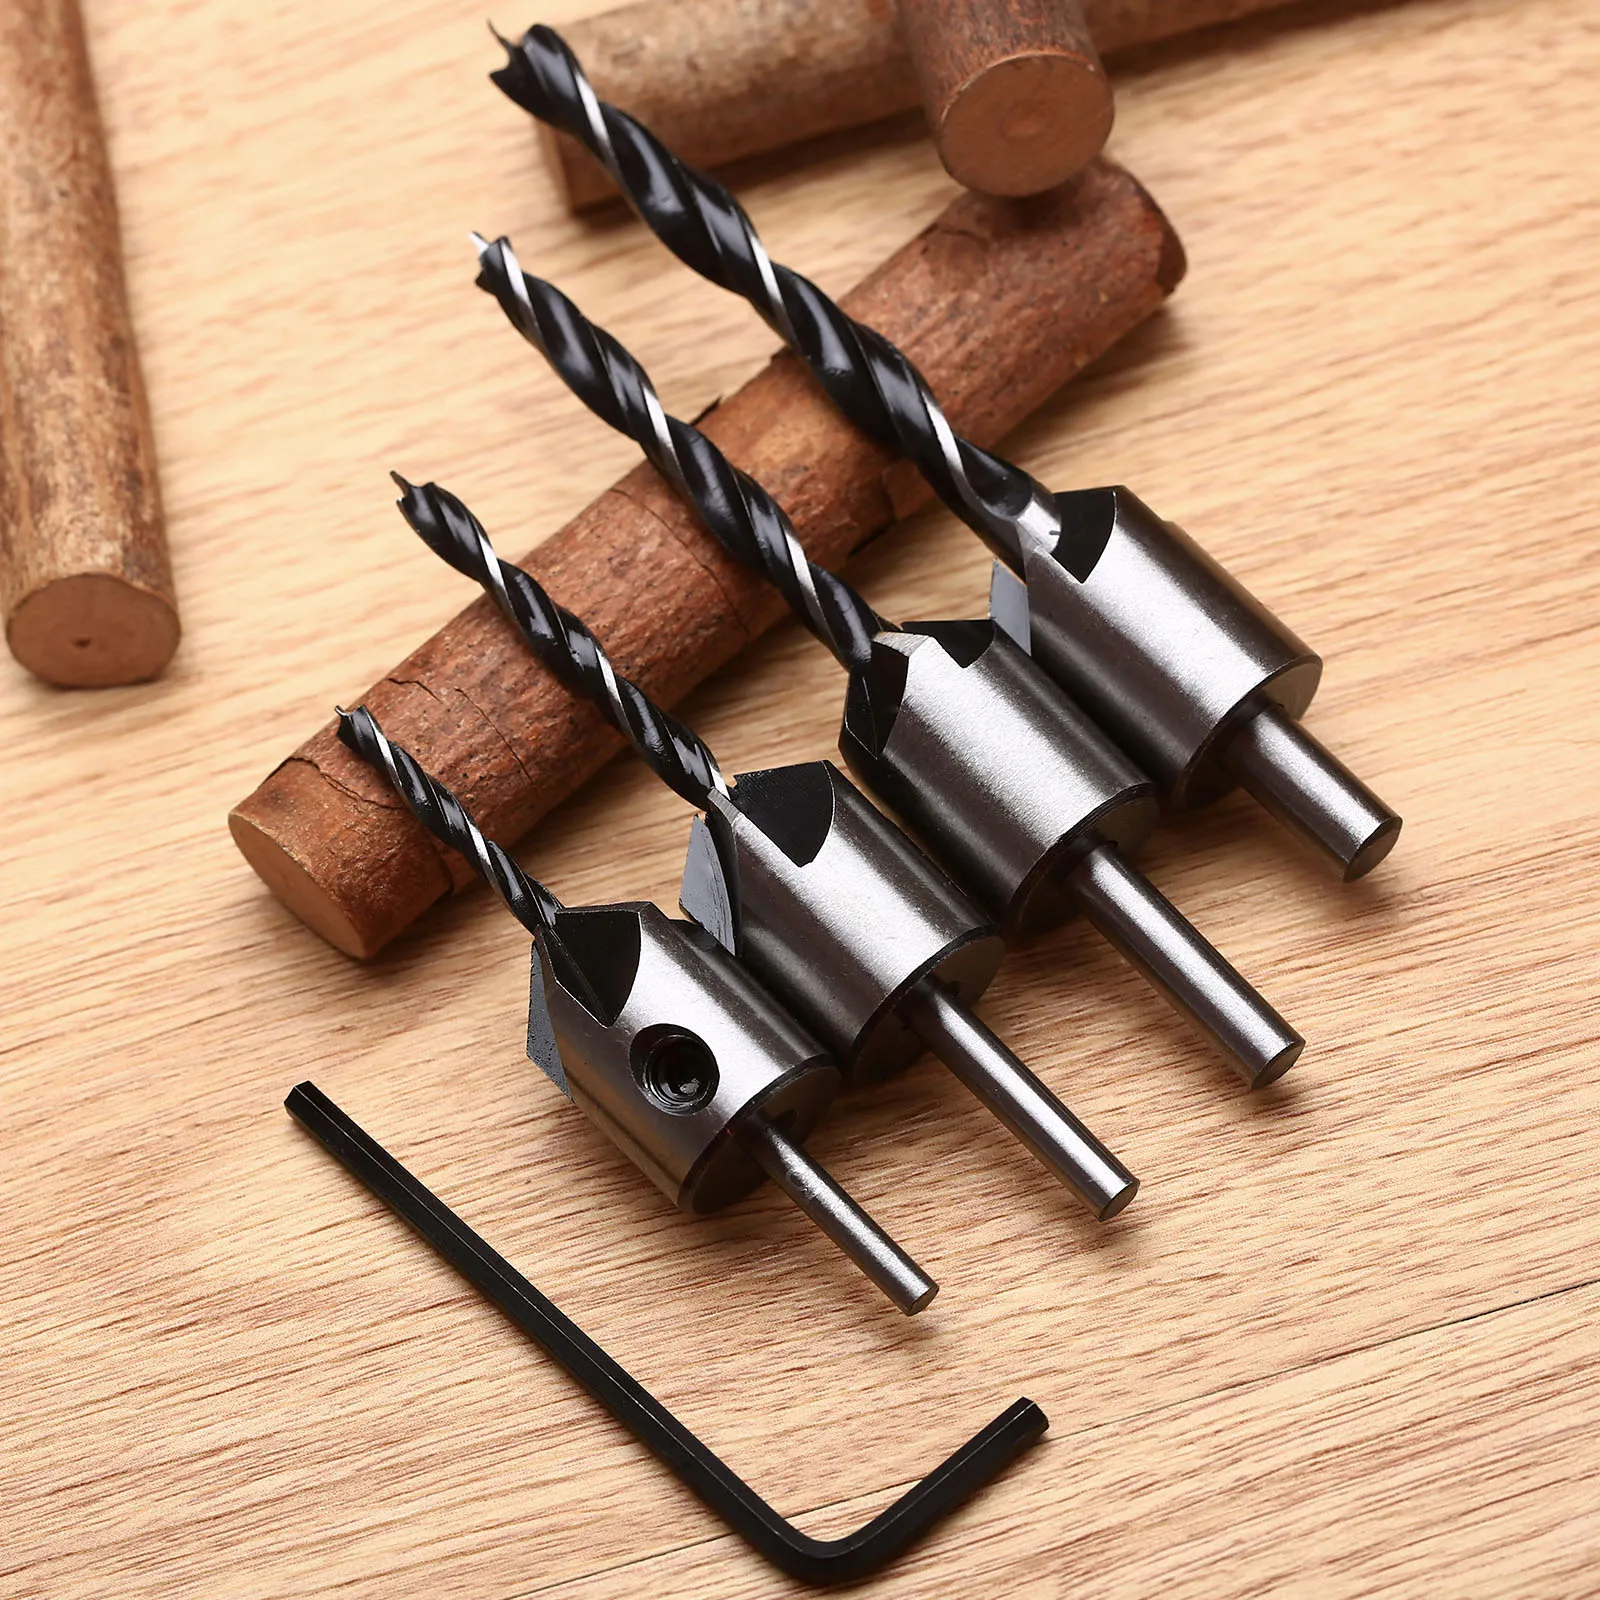 

4Pcs 3-6mm HSS Steel Flute Countersink Drill Bit Set Screw Reamer Woodworking Chamfer Tool with Hex Shank Wrench Power Tools